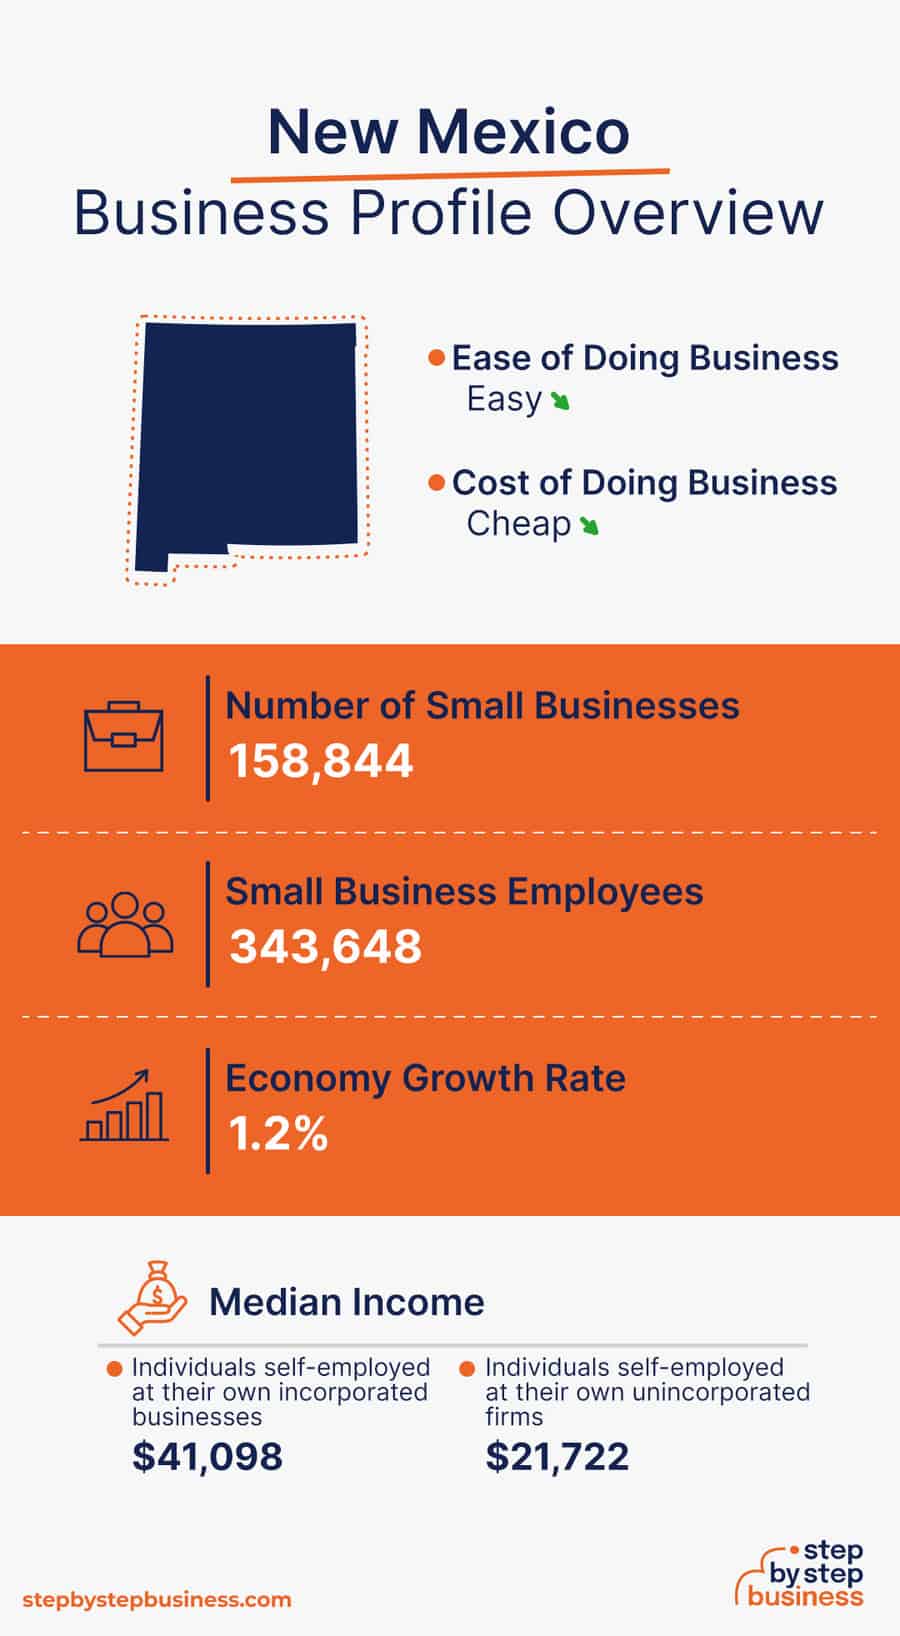 New Mexico Business Profile Overview